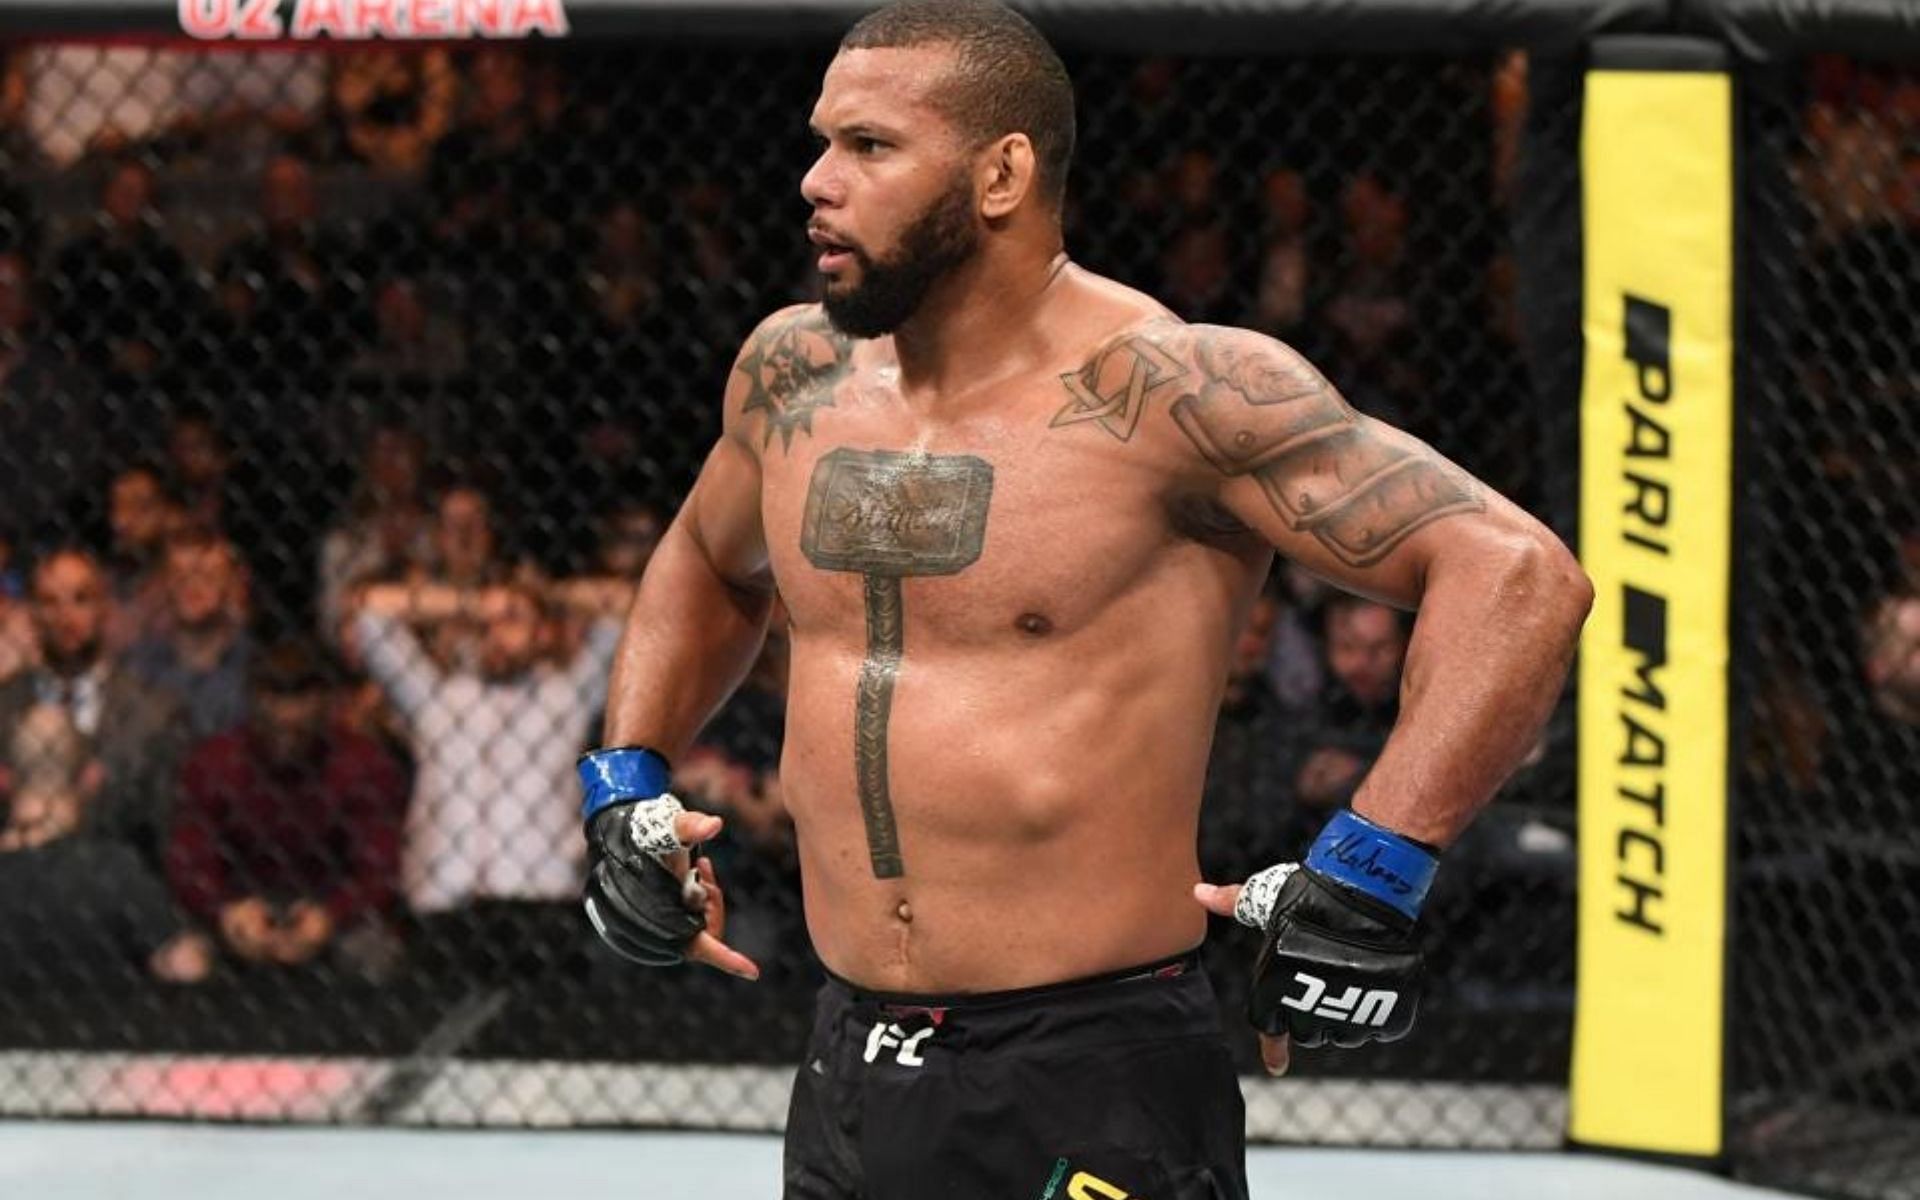 Thiago Santos failed to make a mark during his run on the Ultimate Fighter reality show